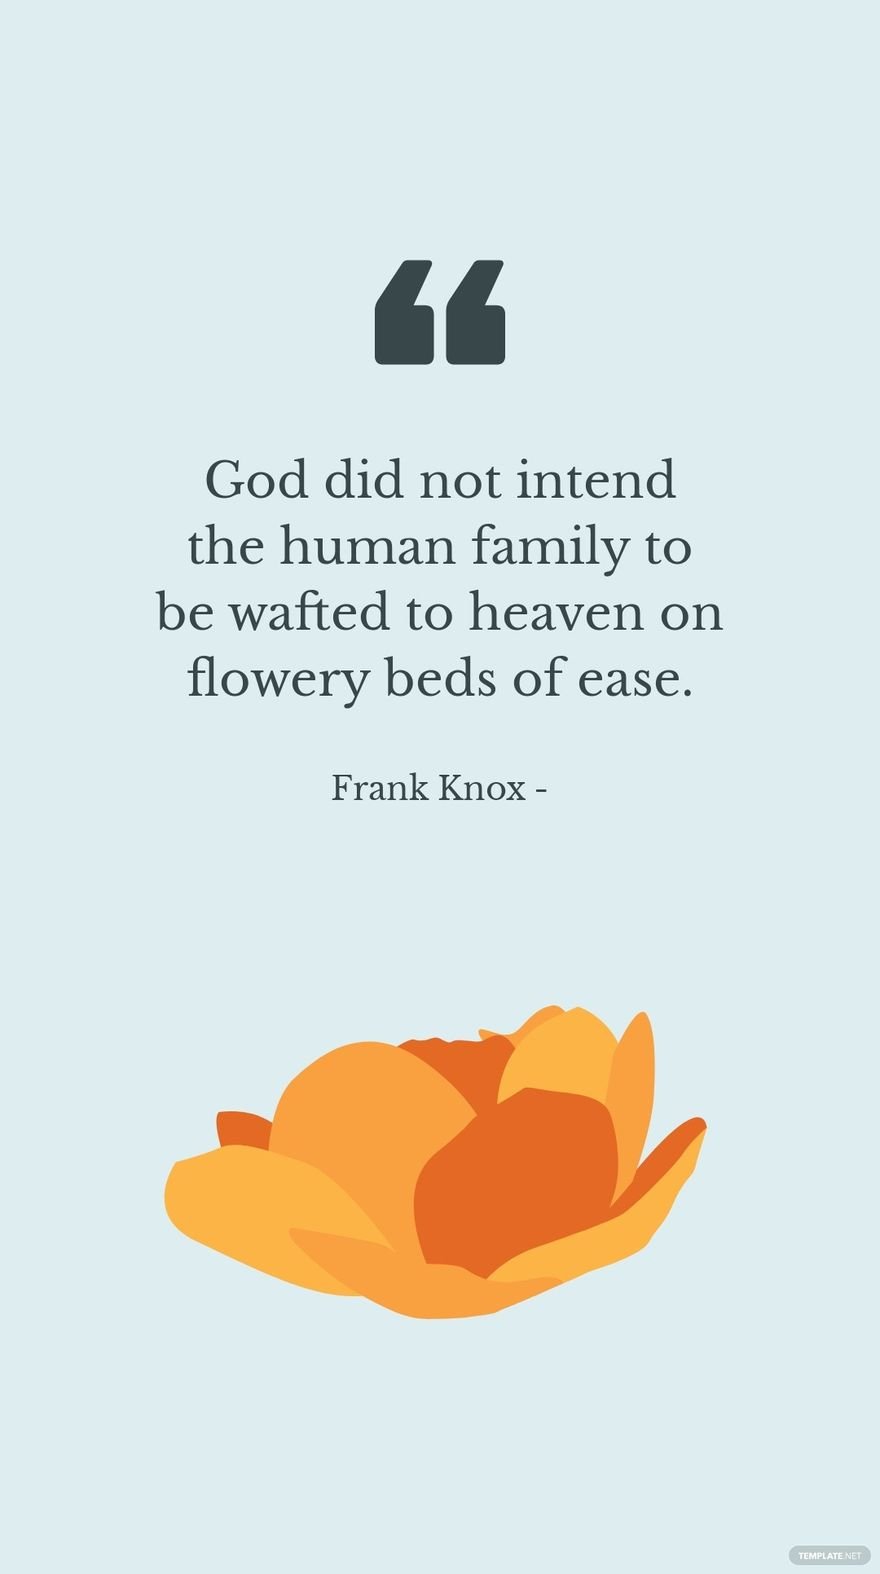 Free Frank Knox - God did not intend the human family to be wafted to heaven on flowery beds of ease. in JPG